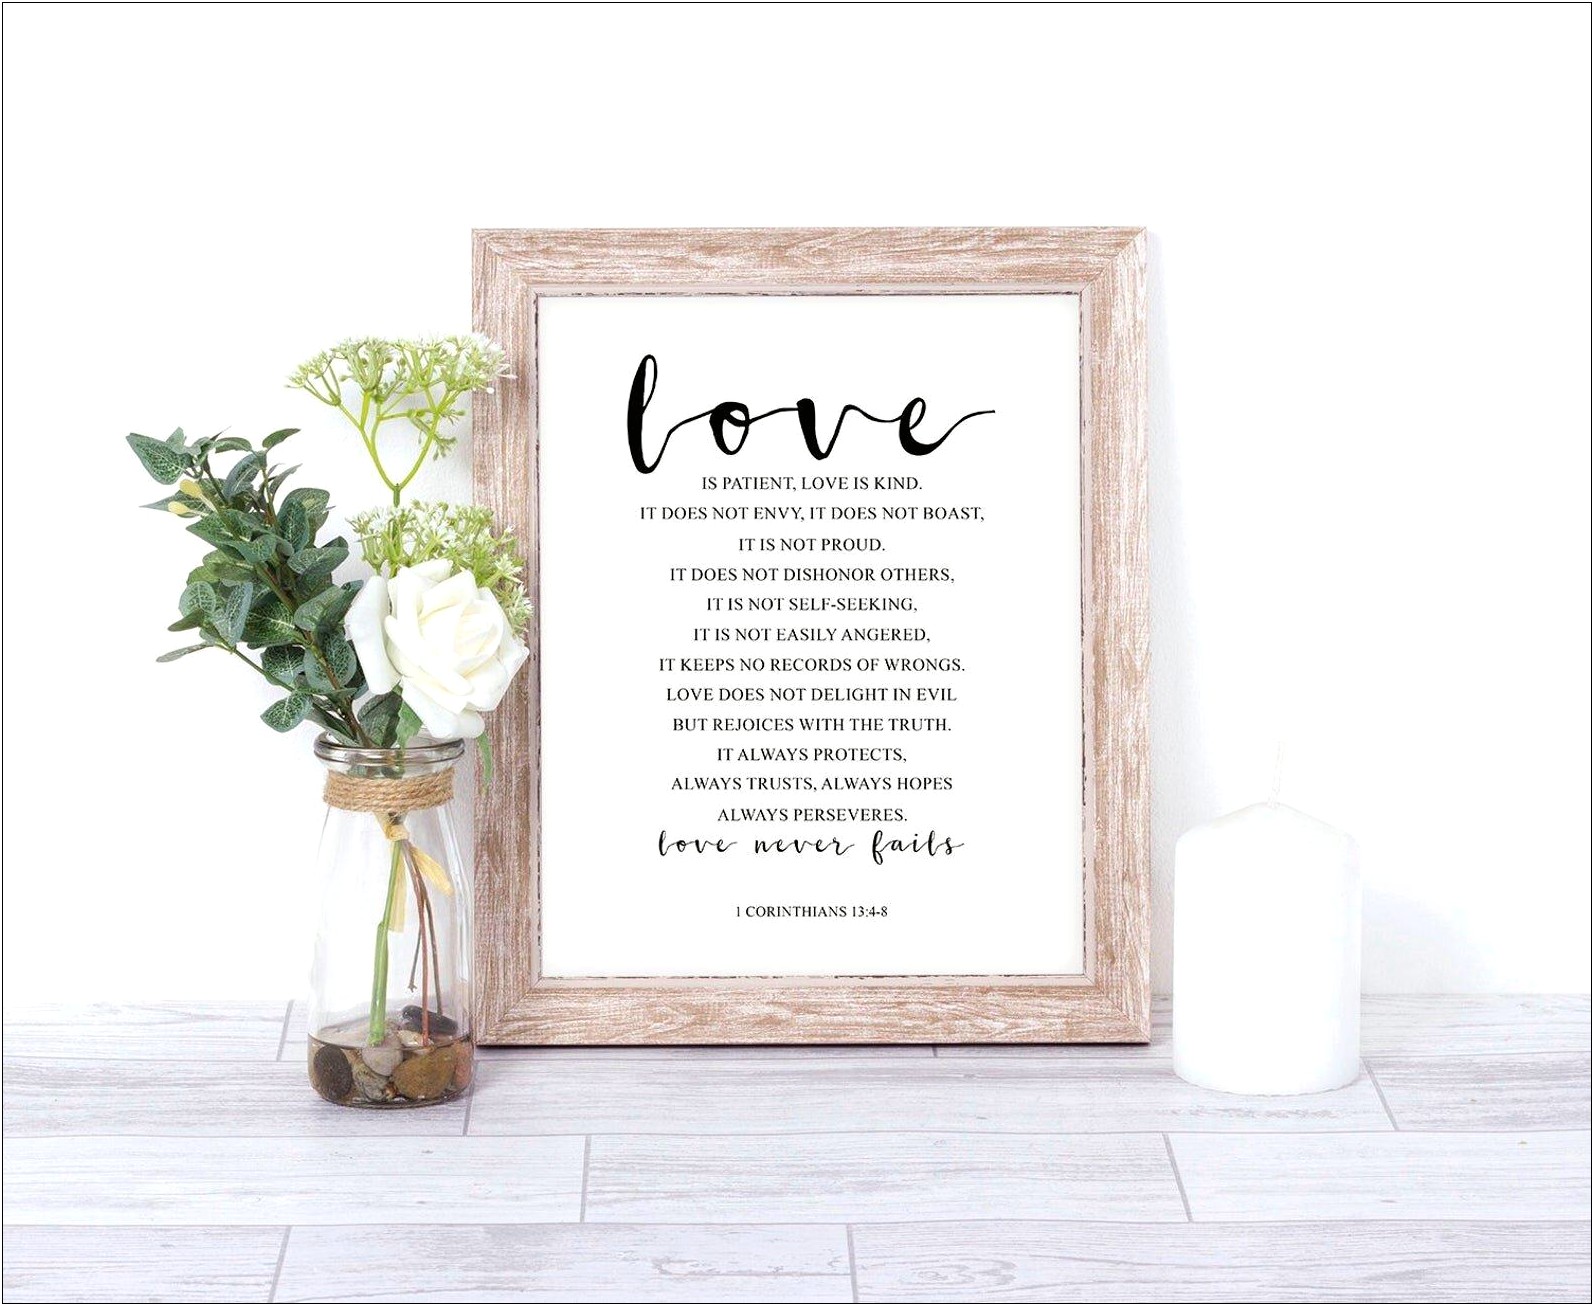 Bible Verses About Love For Wedding Invitations